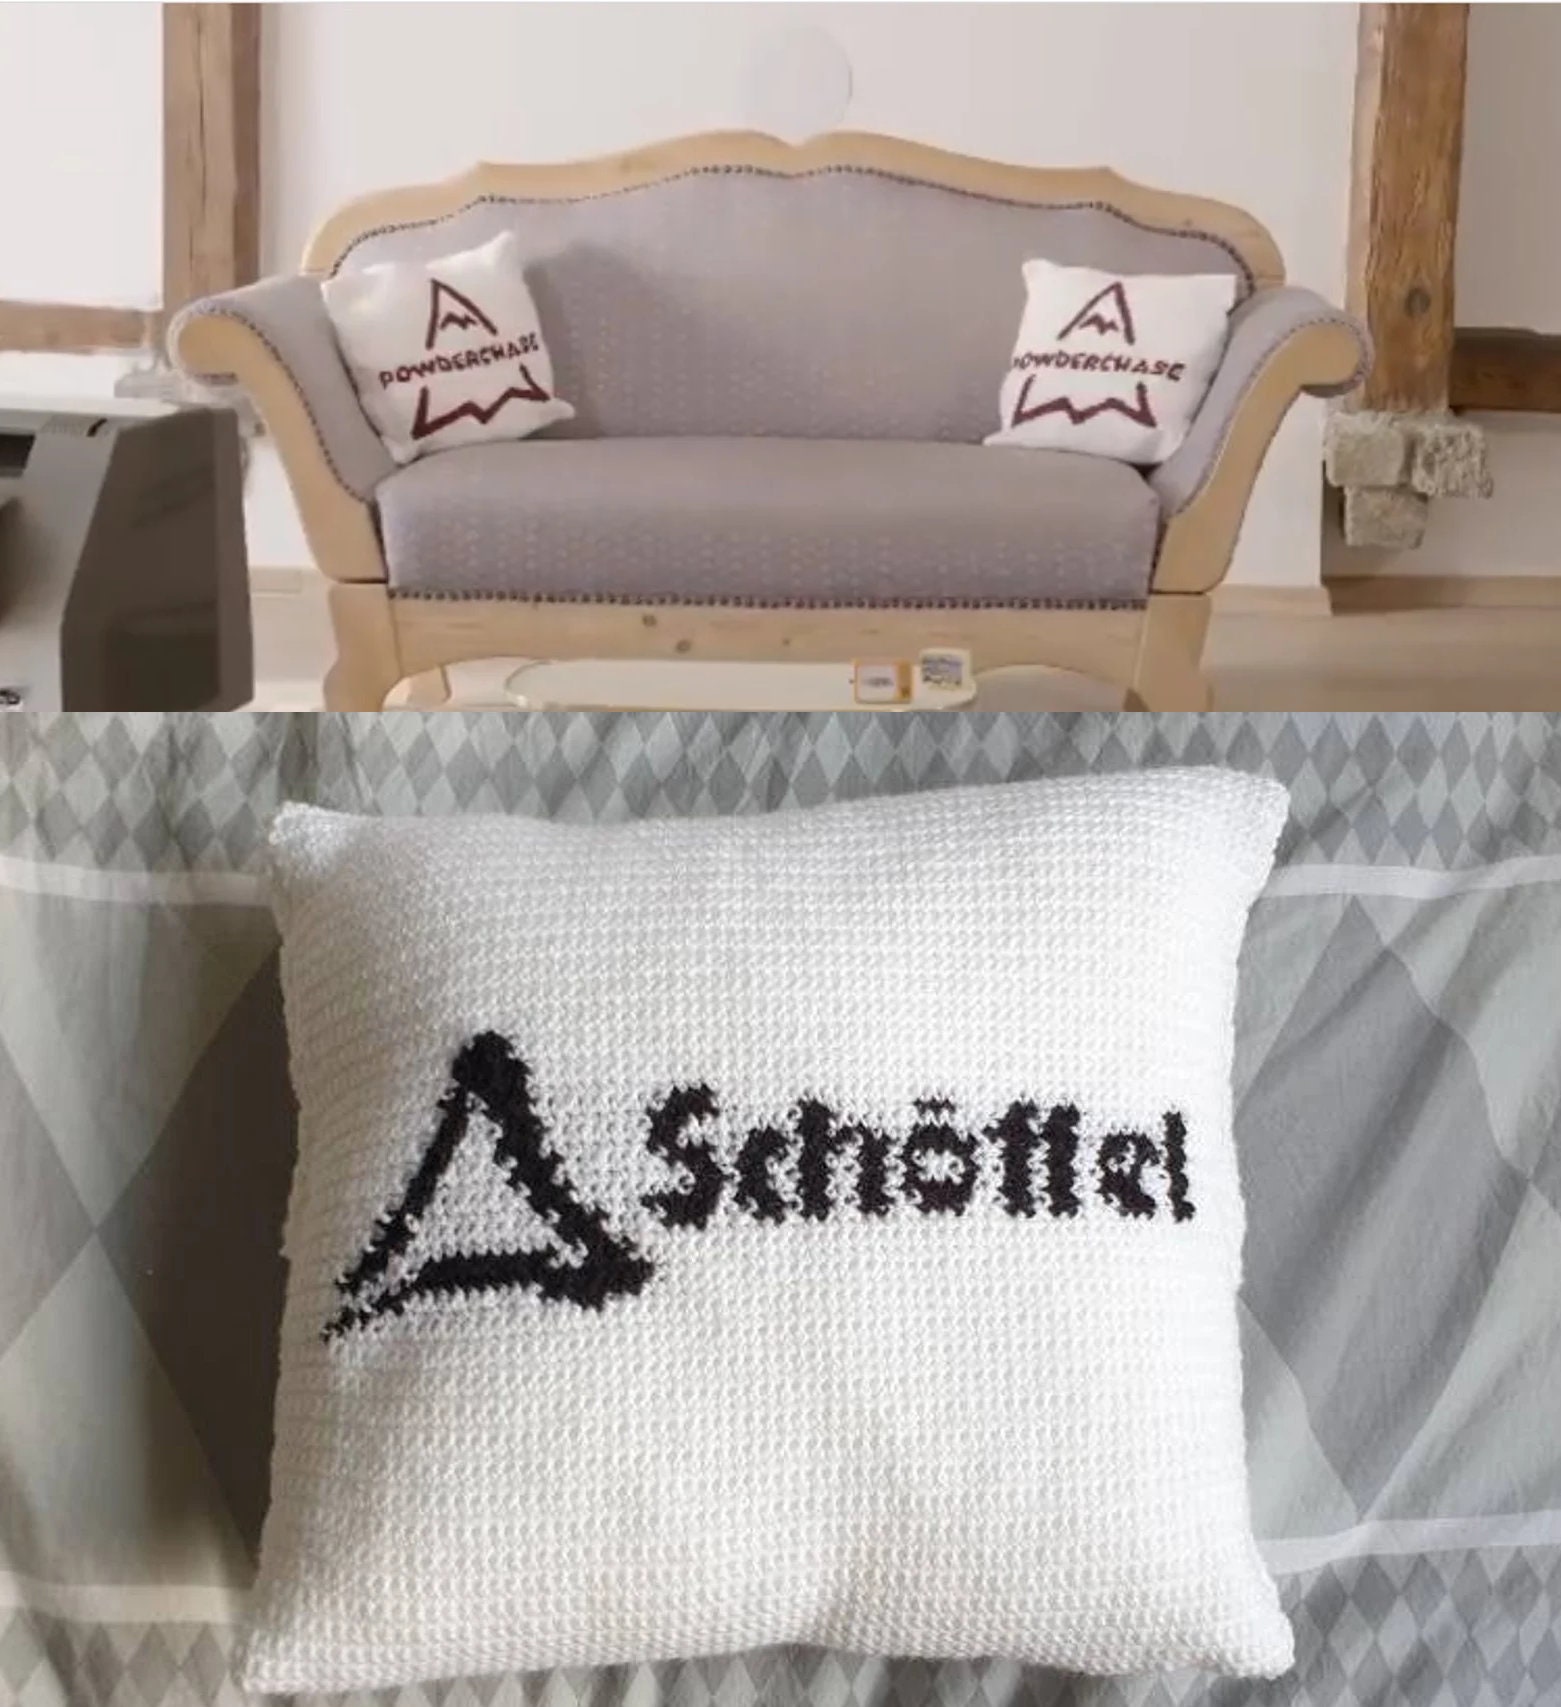 Hobbii - 🤩 DELUXE CROCHET PILLOW 🤩 You really loved our